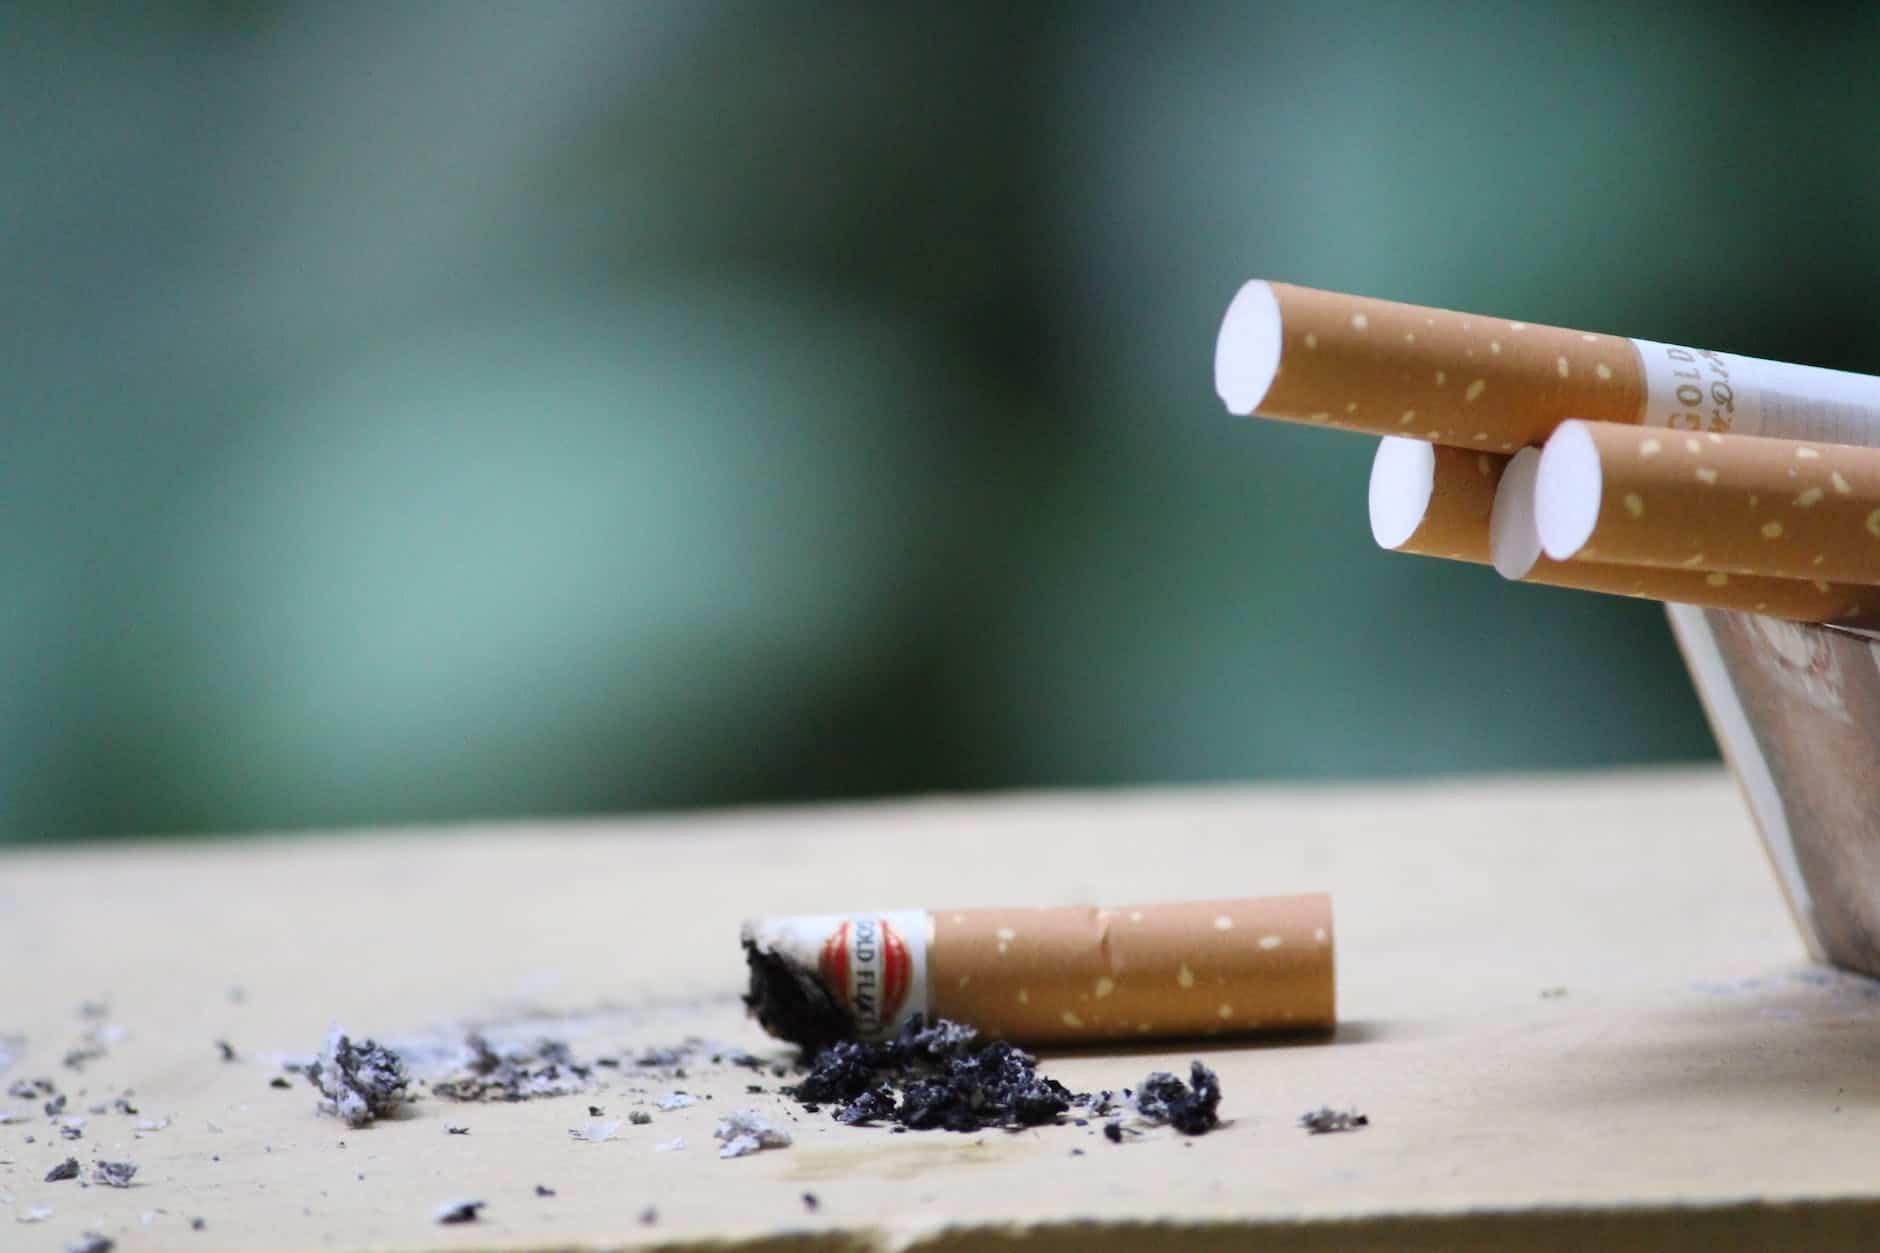 Tobacco advertising could soon be effectively over in Switzerland